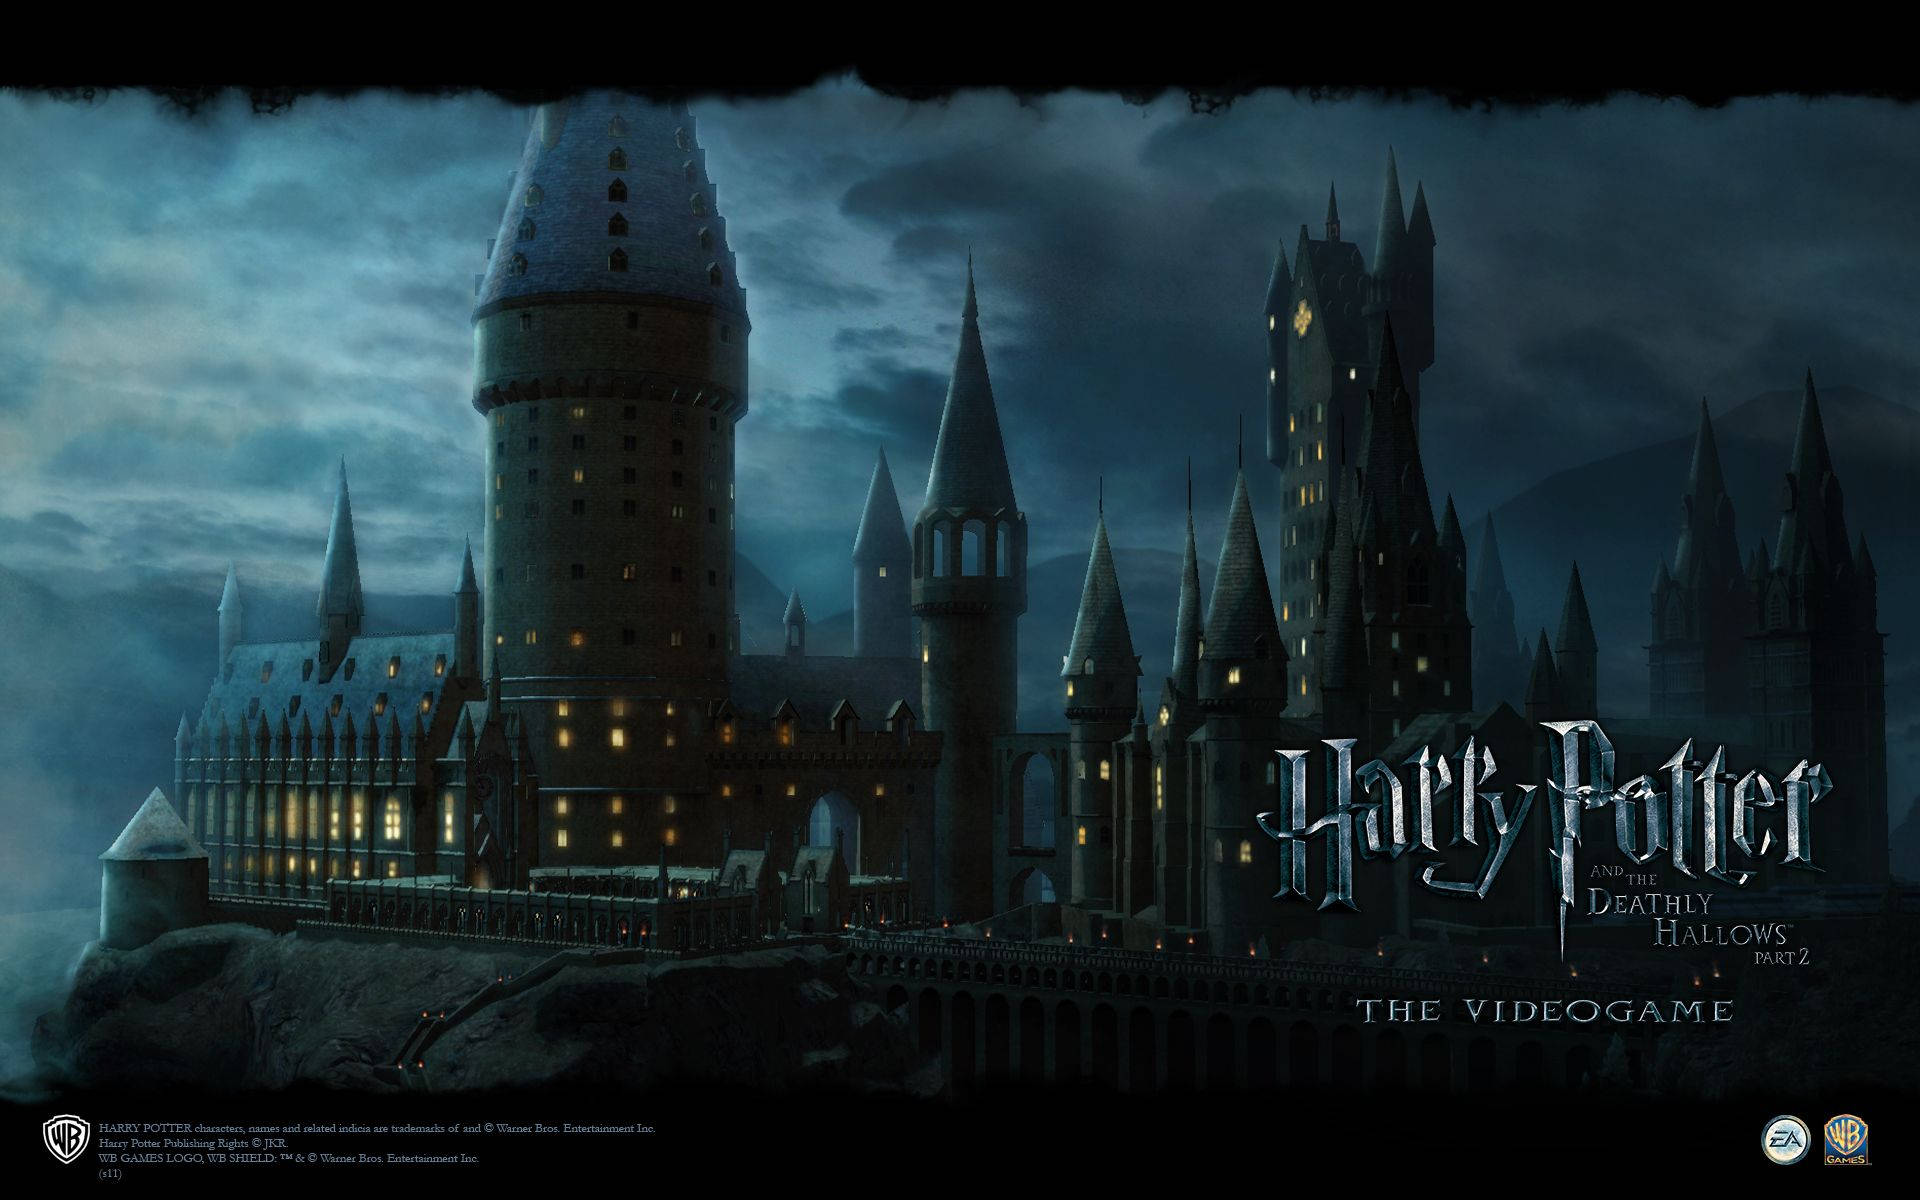 Hogwarts In Deathly Hallows